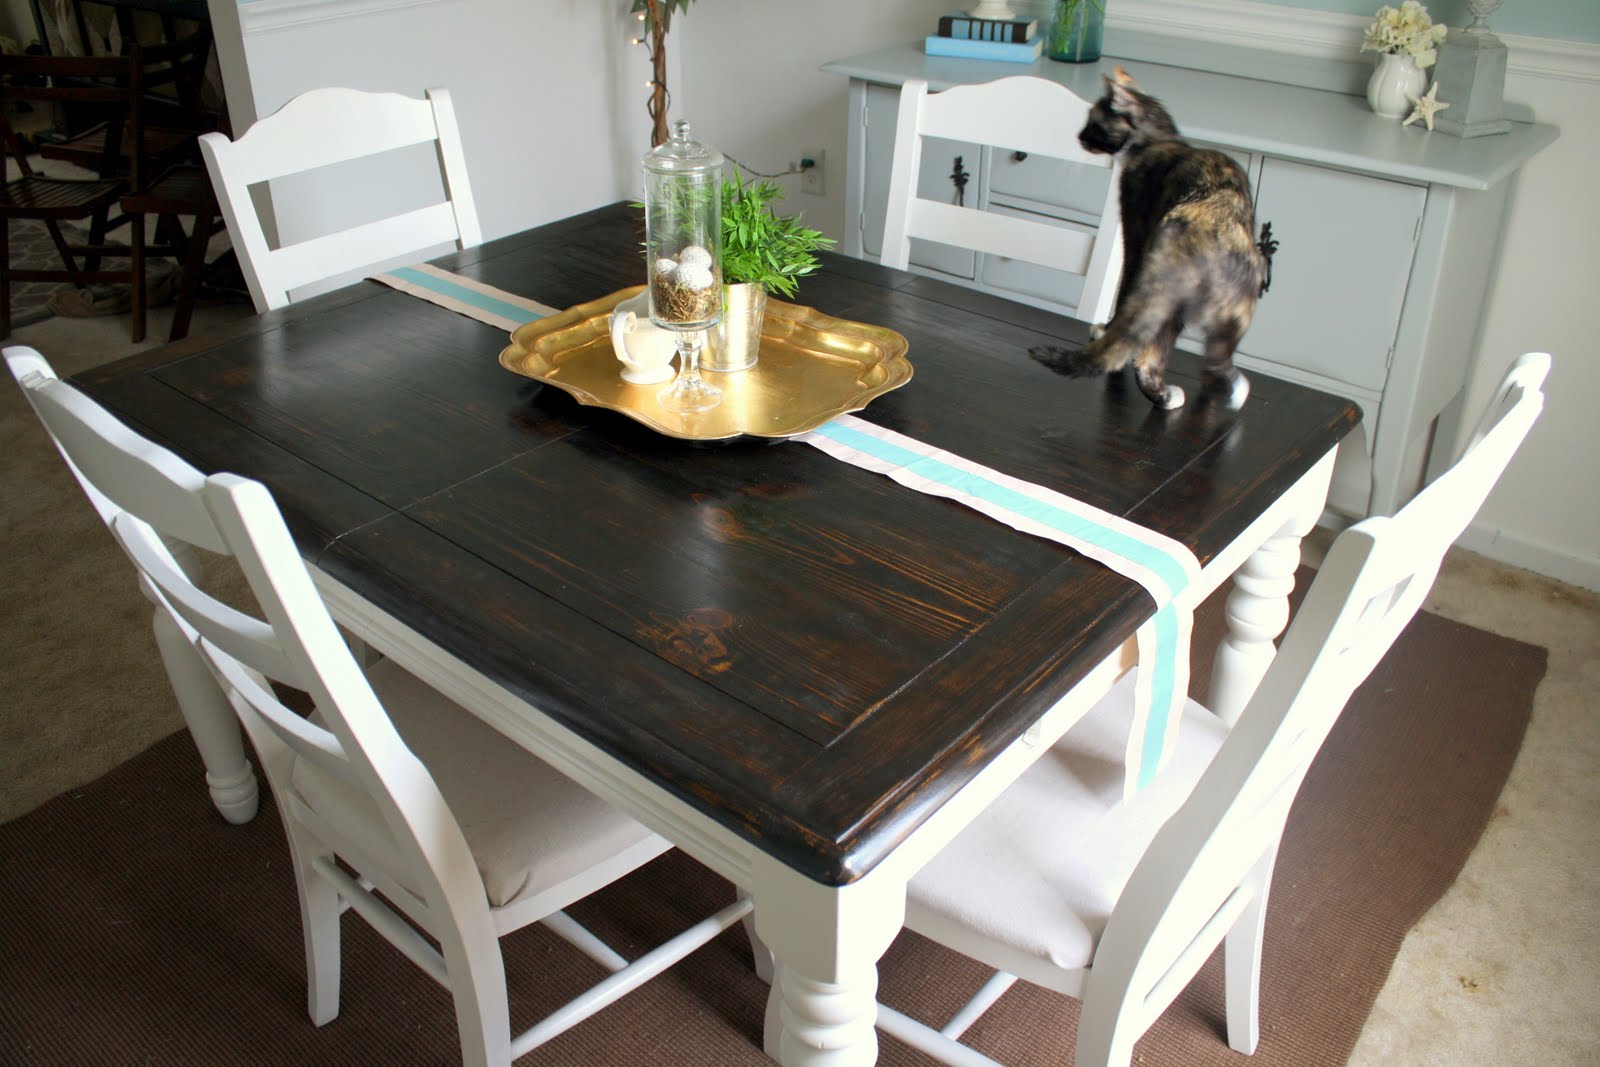 Refinishing The Dining Room Table Shannon Claire - How To Sand And Restain Kitchen Table